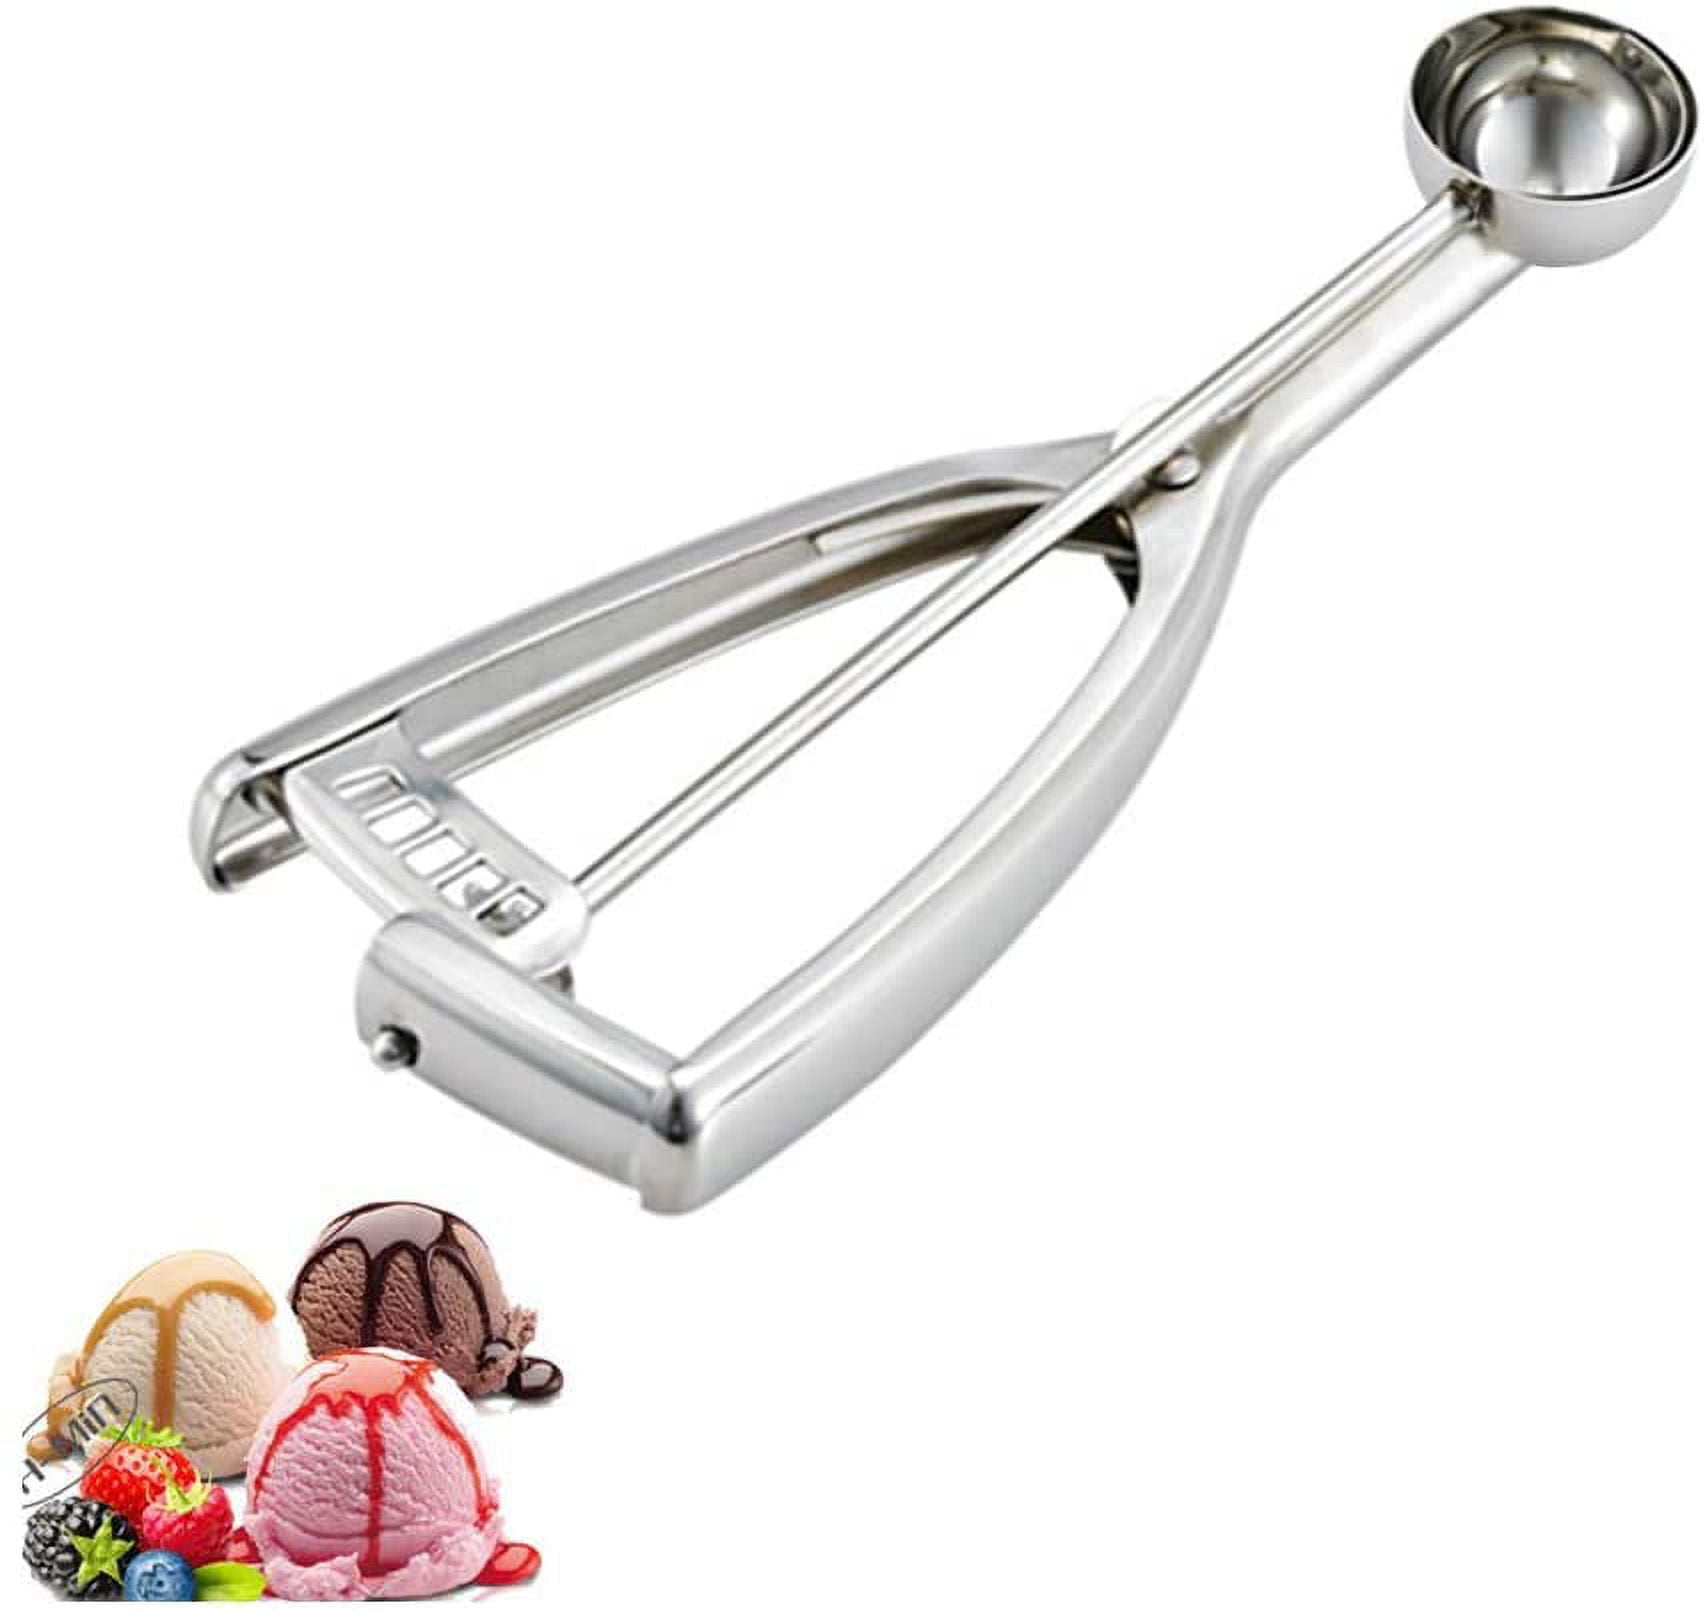 DS. DISTINCTIVE STYLE Mini Cookie Scoop #100-2 Teaspoon Scoop - Mini Ice  Cream Scoop, Made of Food Grade 304 Stainless Steel with Comfortable Rubber